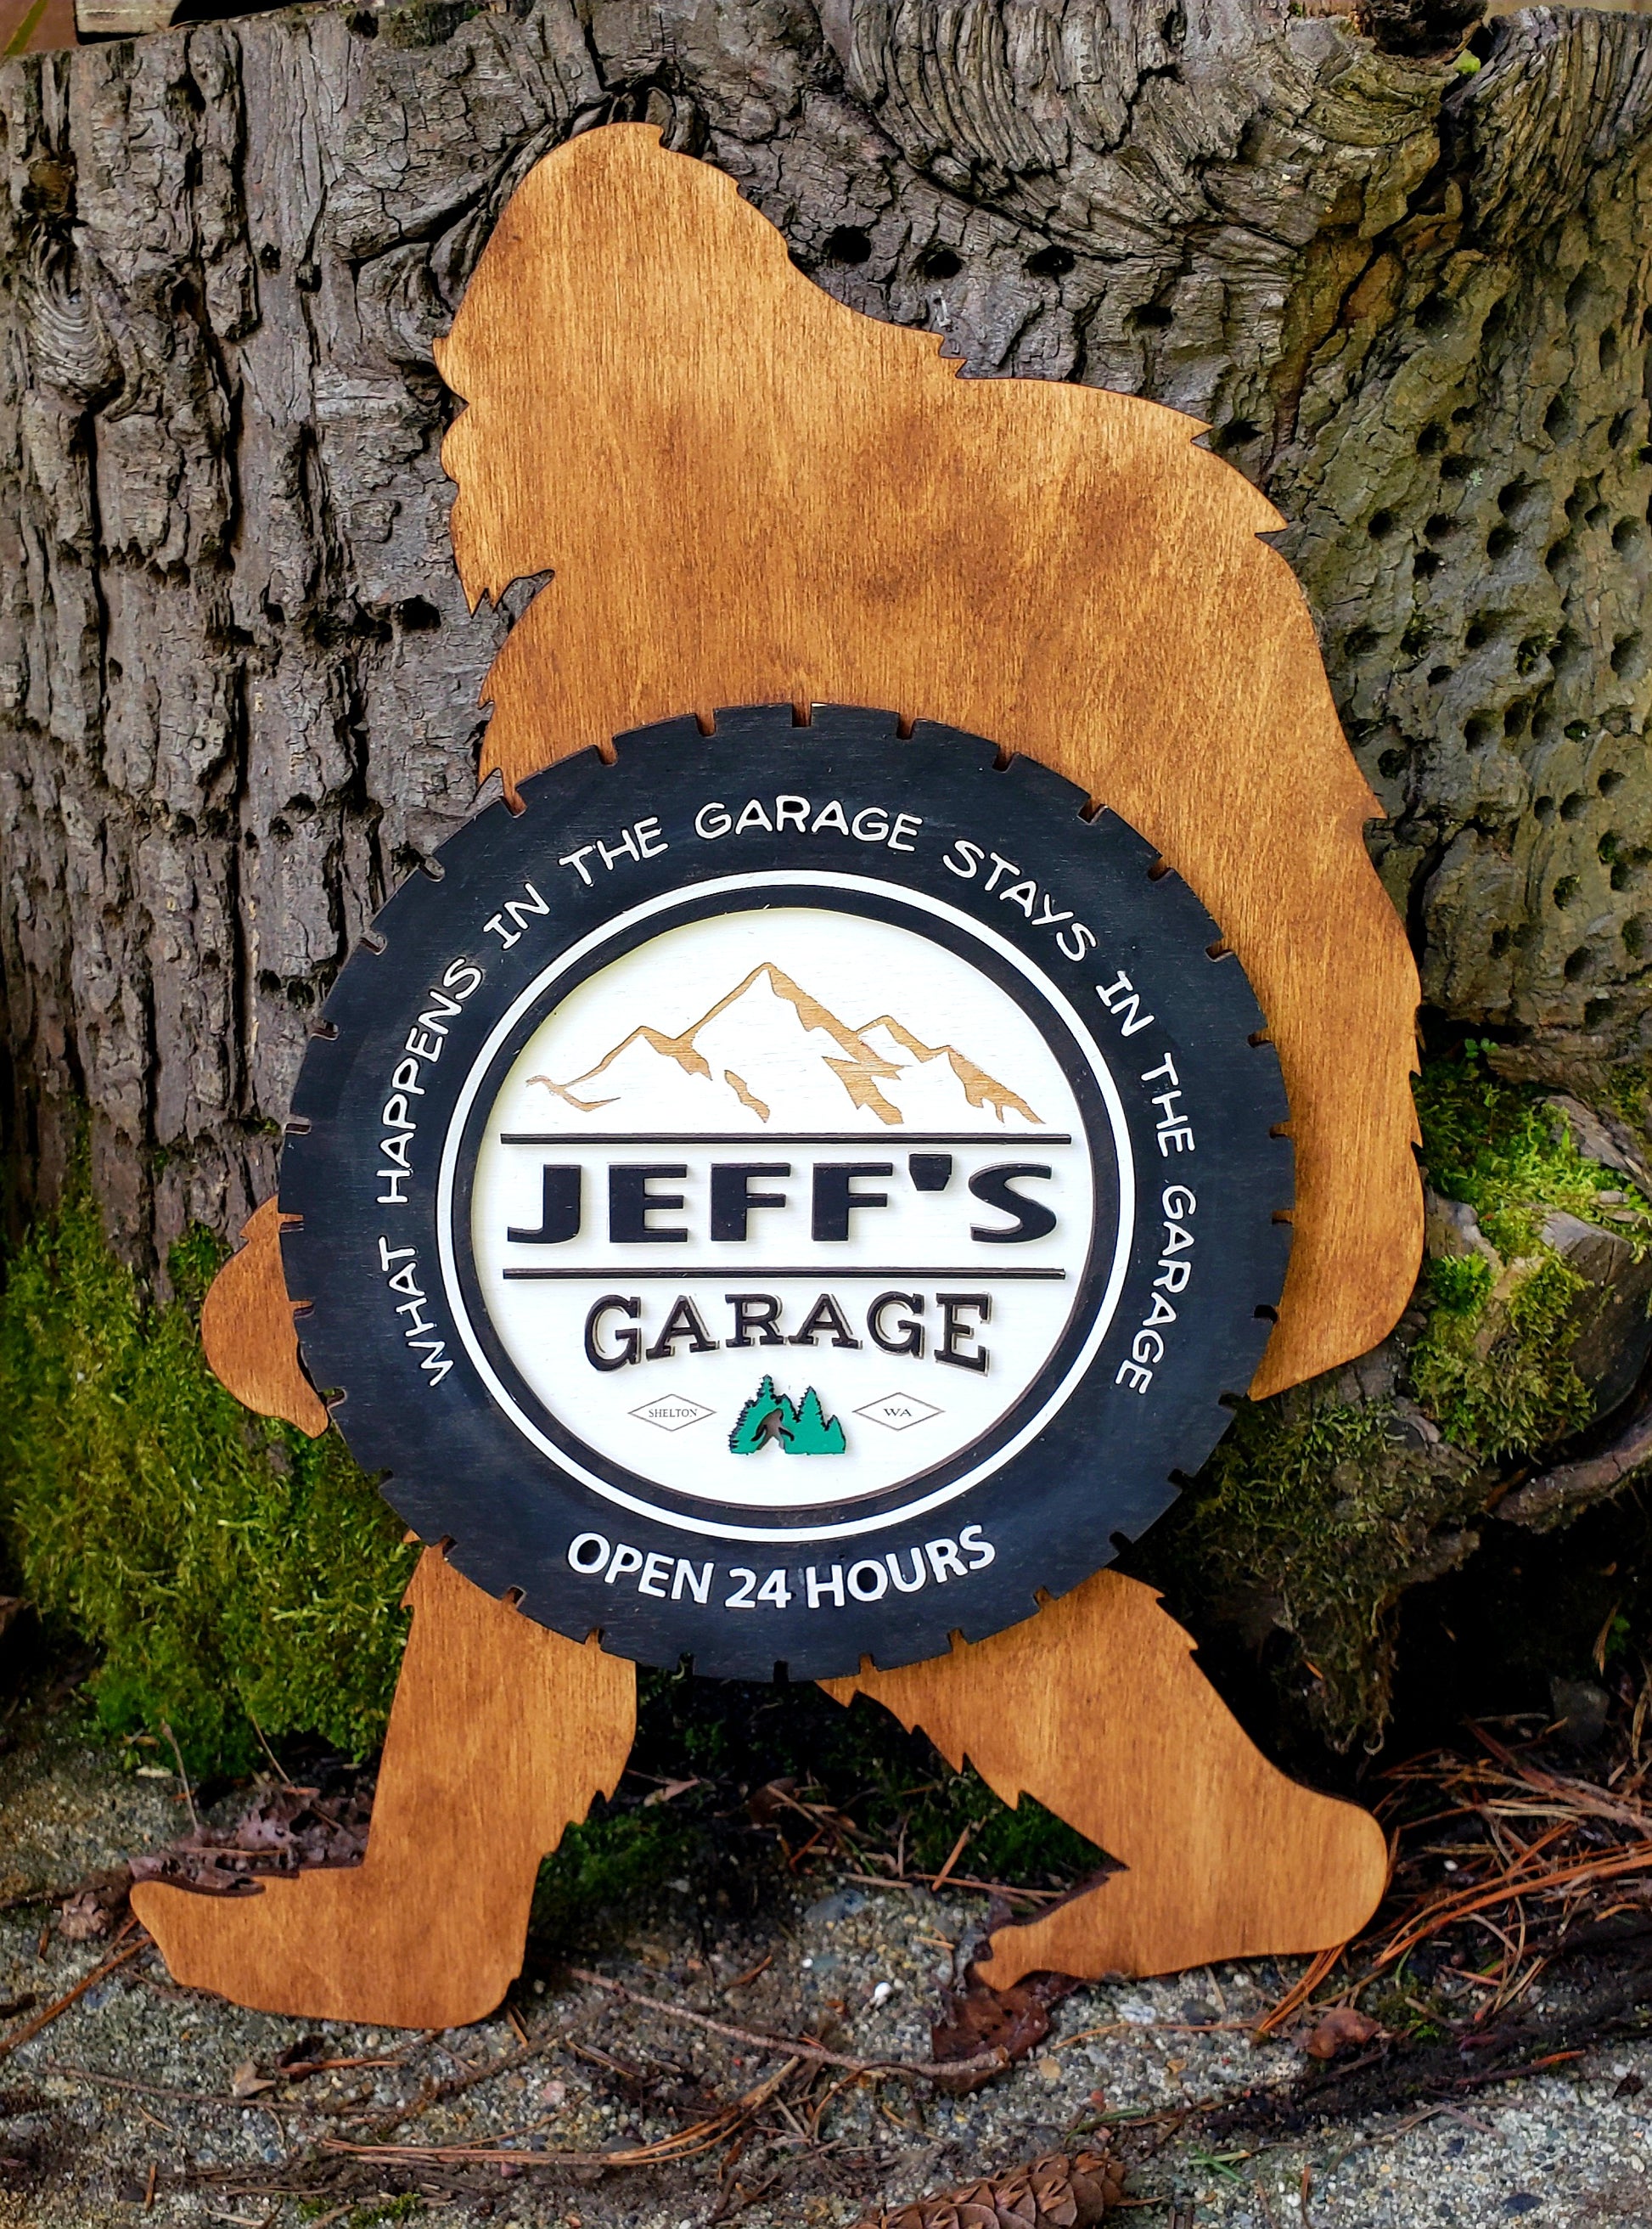 Take the road less traveled with our Bigfoot Garage Sign! Whether you're a mystery-lover or just like to keep things wild, this sign lets you personalize your garage with 24 hours of guaranteed no-questions-asked fun. Hand painted on durable birch wood, with a tire and bigfoot image, this sign will make sure you always remember - "What happens in the garage, stays in the garage!"